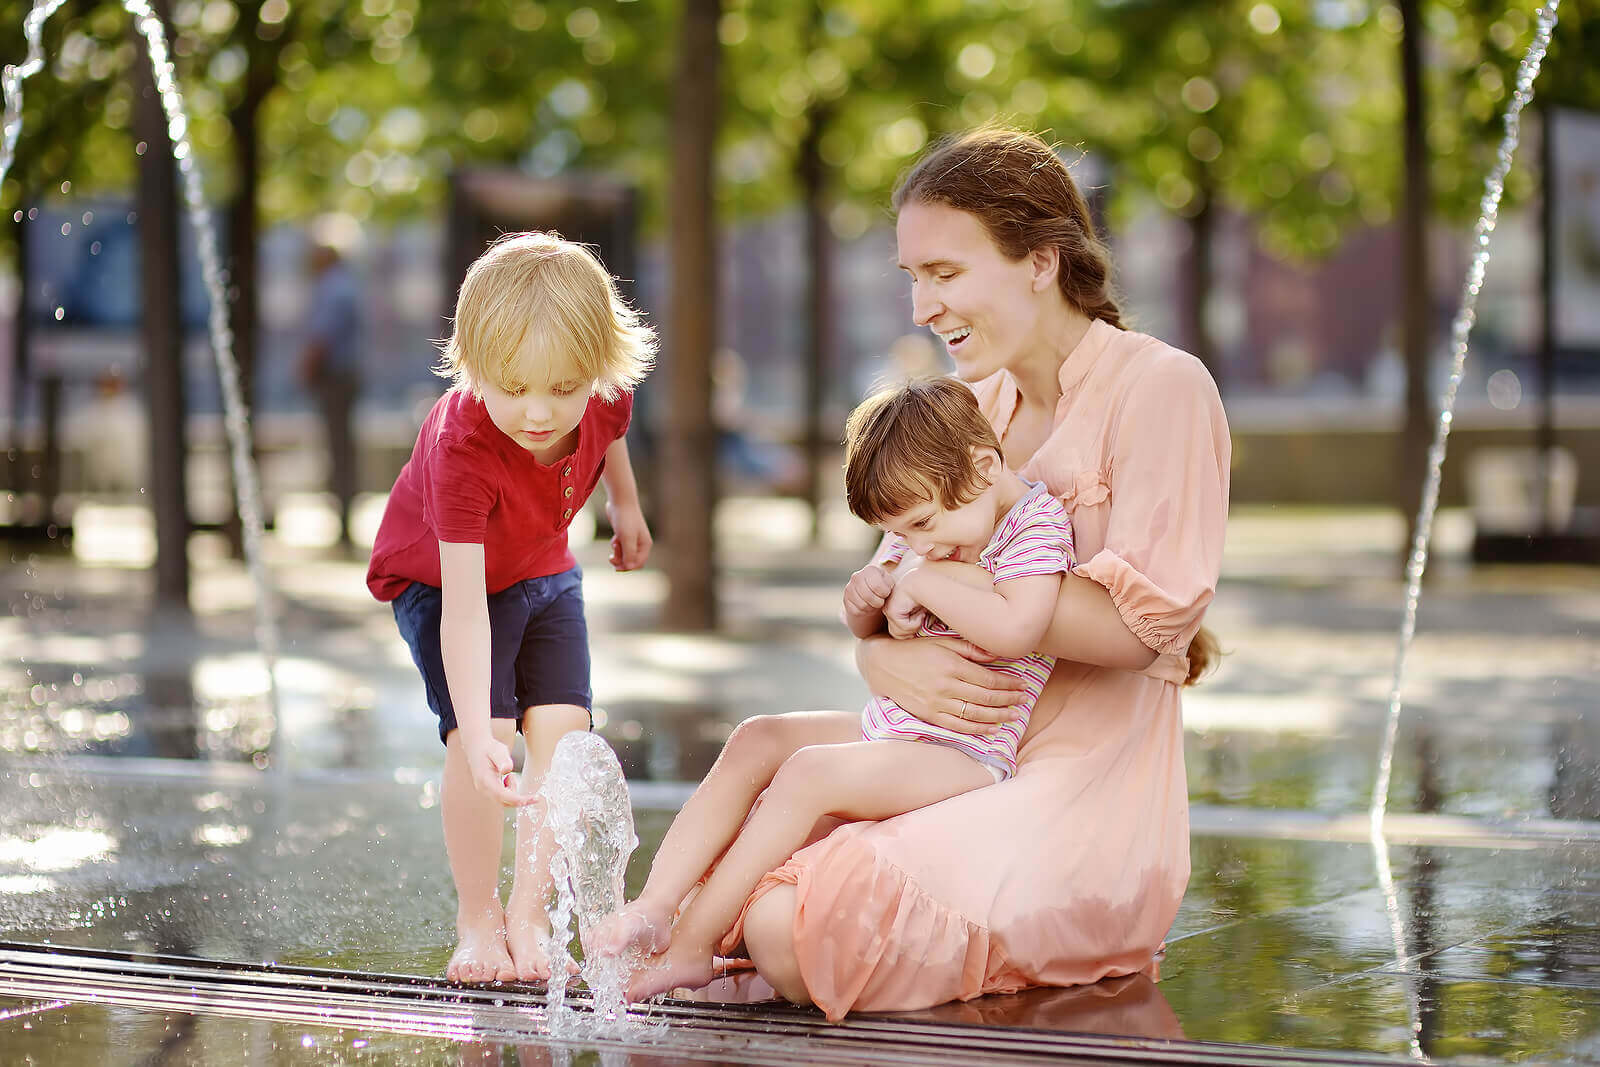 A mother playing in a fountain with her children.